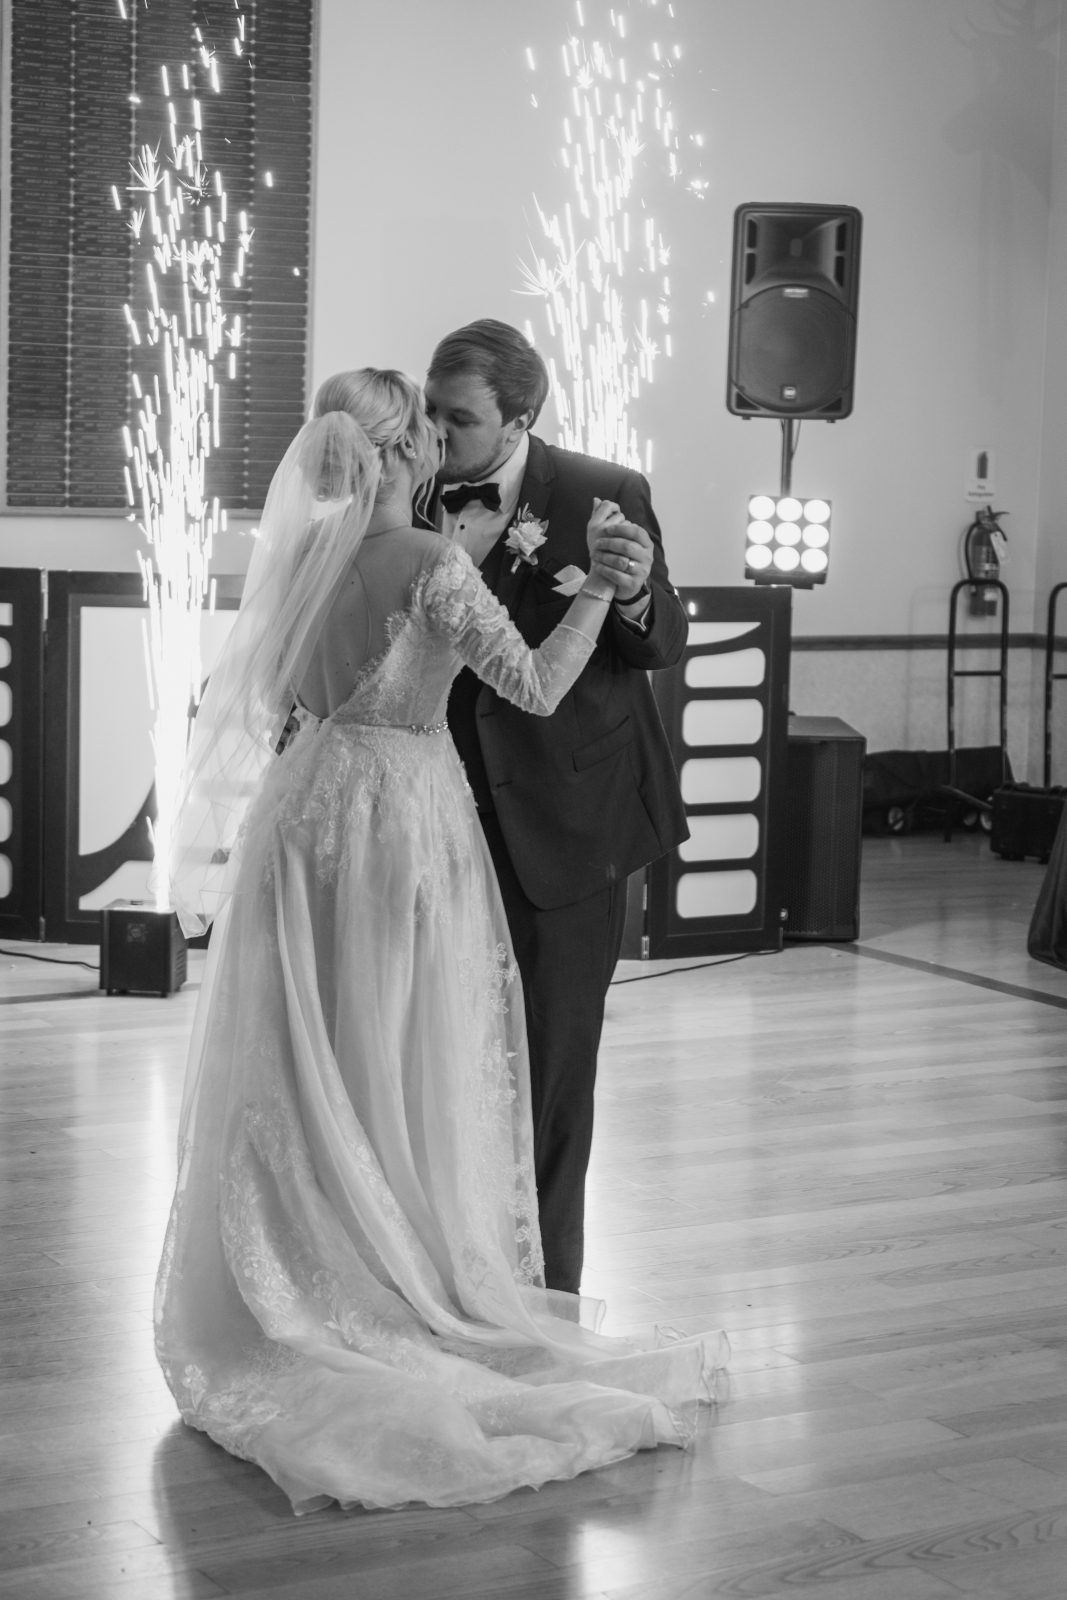 Bride and groom first dance, sweet, romantic, black and white, classic wedding photo, sparks, indoor fireworks, Sparkular cool sparkler machine, fall wedding, cute fall wedding reception at Grand Pacific Wedding Gardens